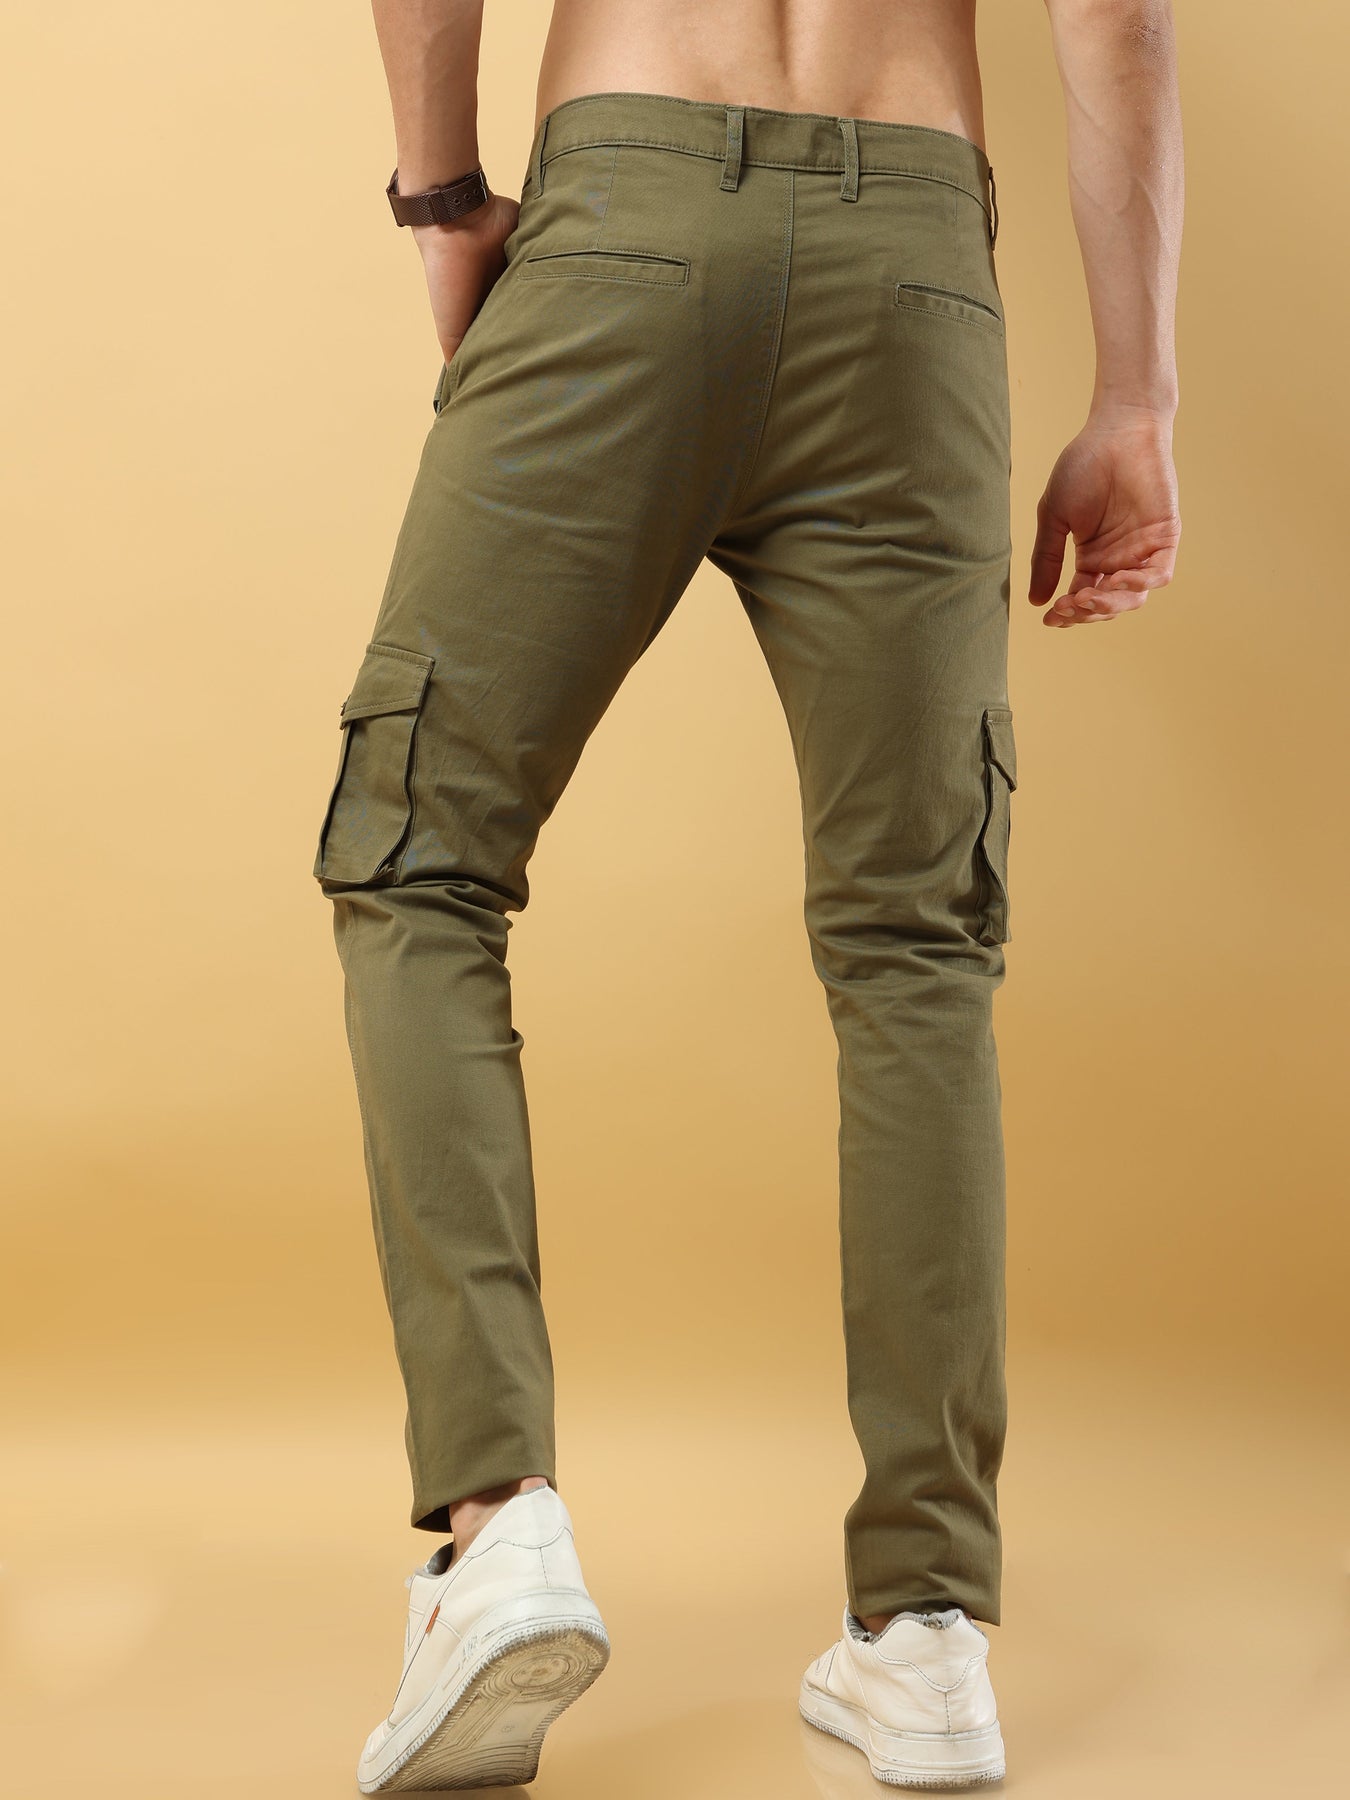 Mens layered outfit with Olive green cargo pants. | Cargo pants outfit, Cargo  pants men, Cargo pants style